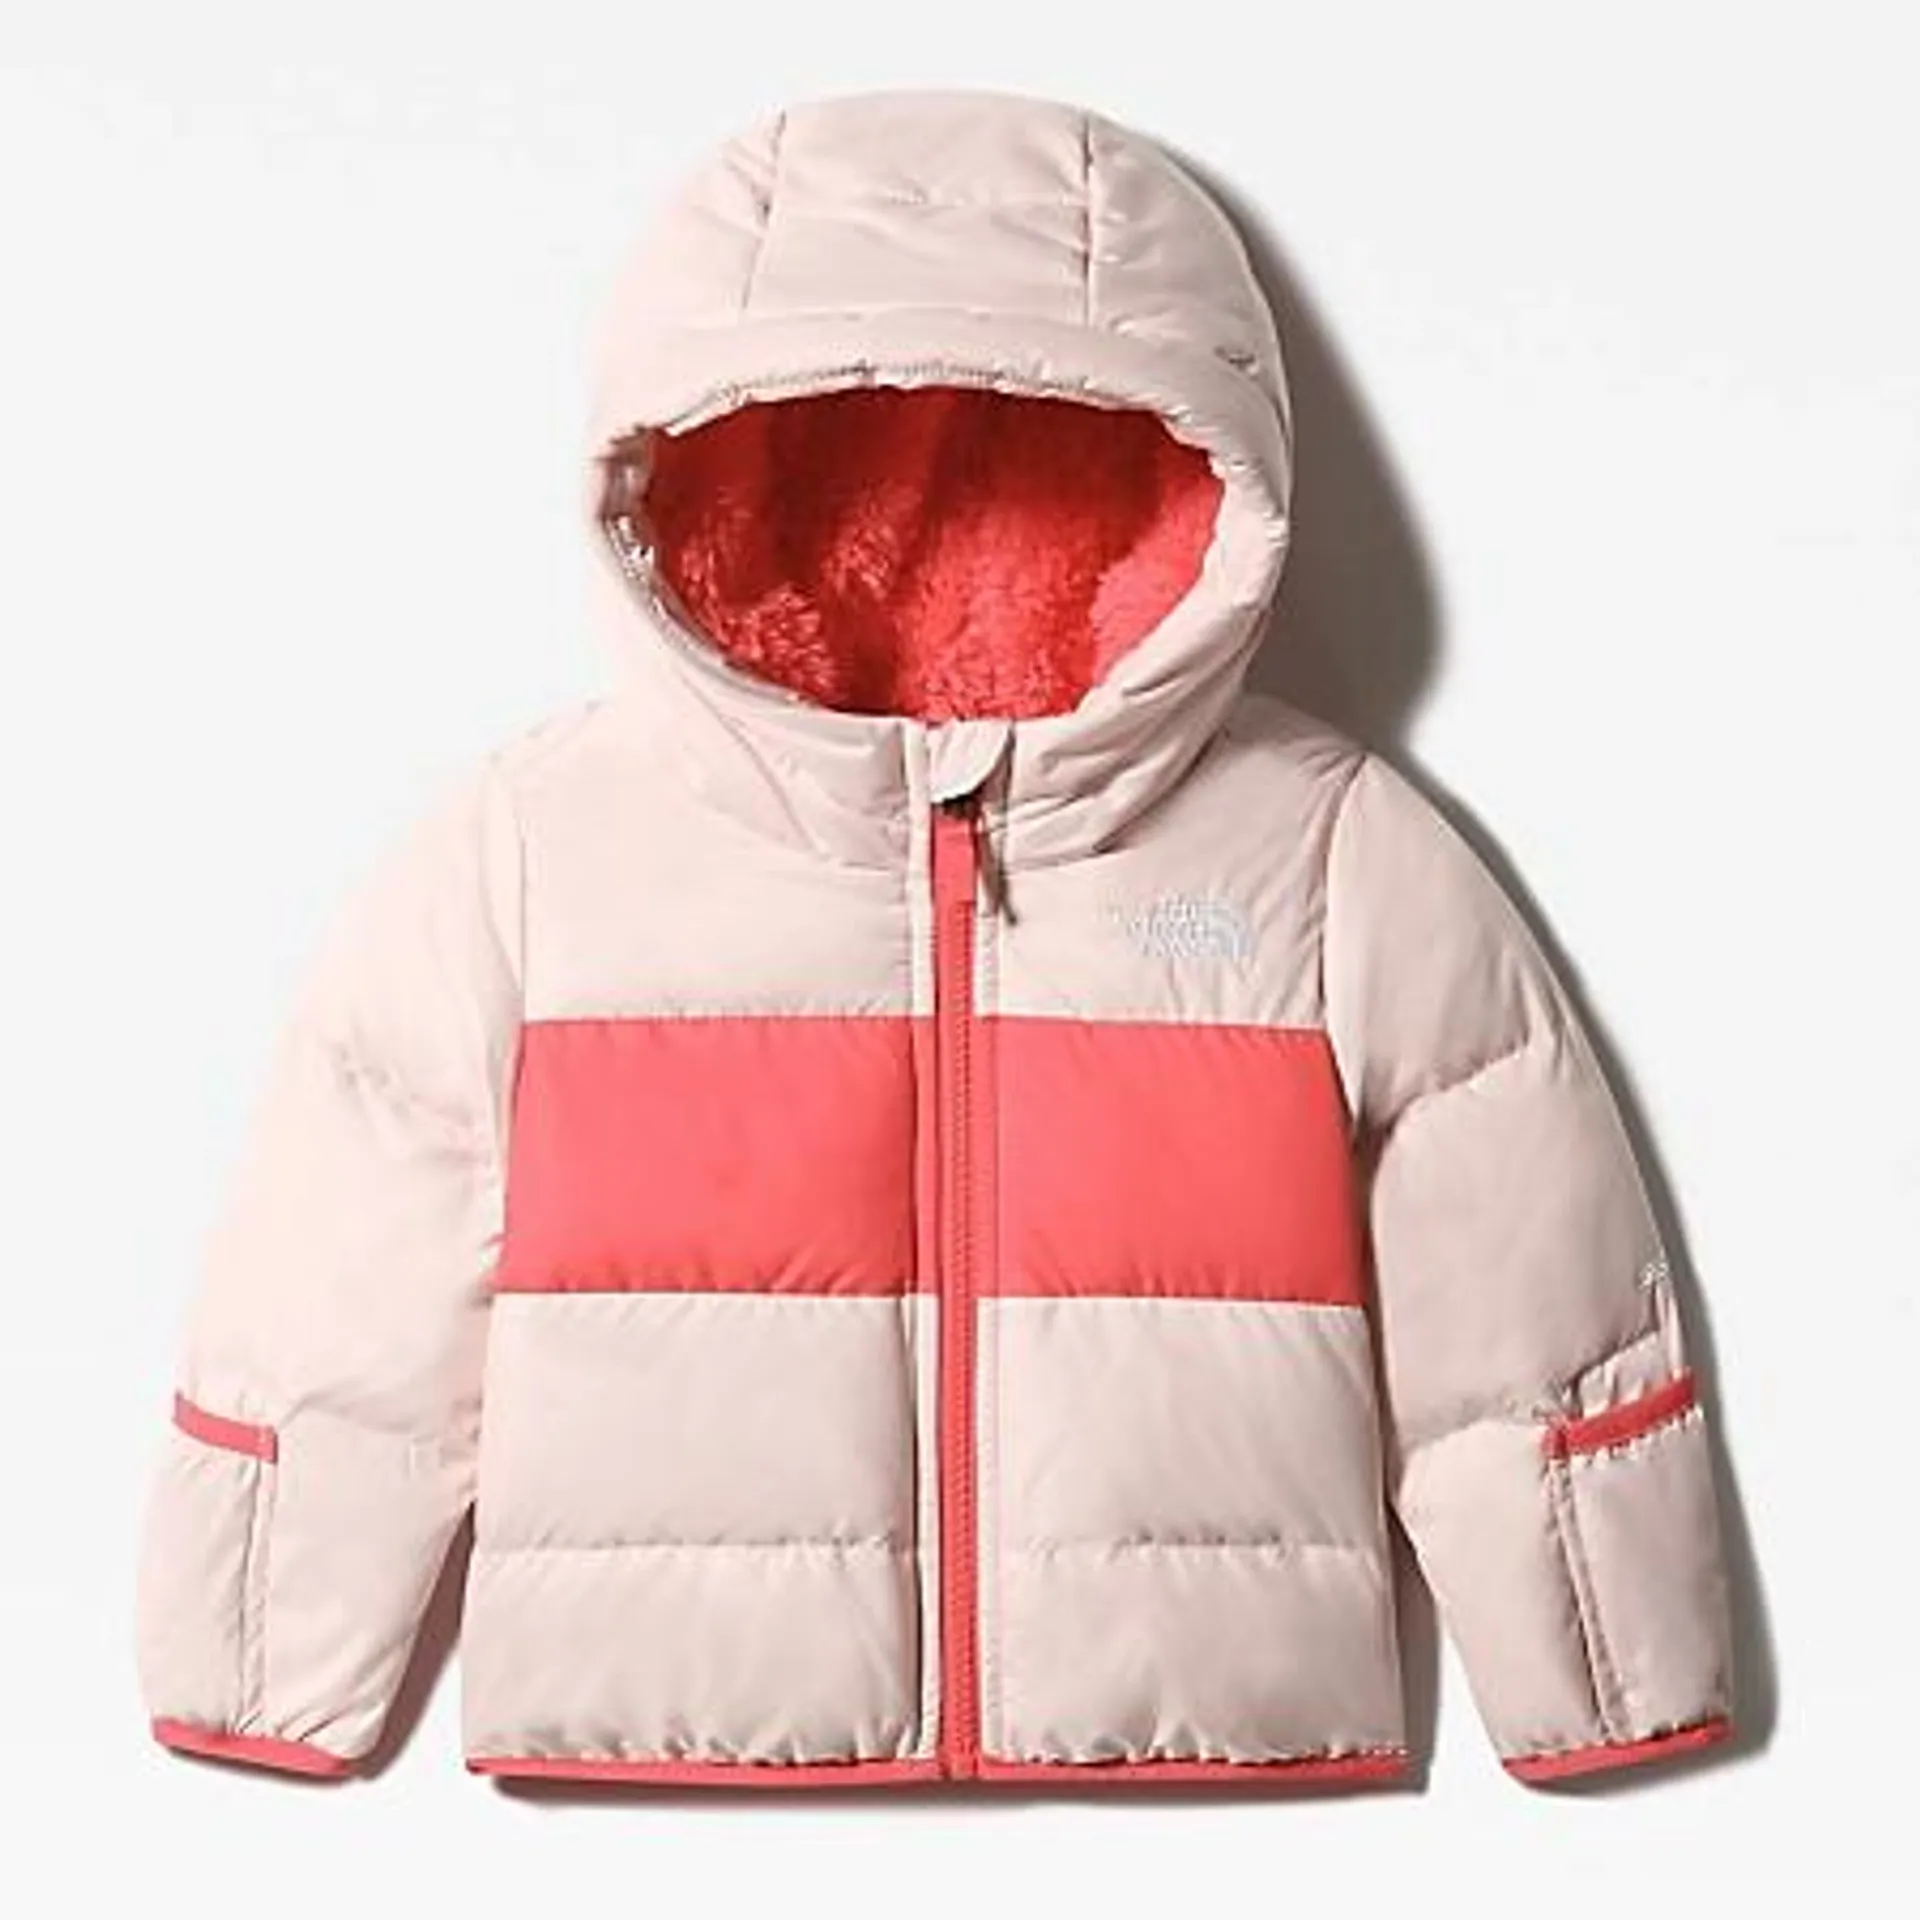 WE NO LONGER CARRY THE Baby Moondoggy Down Jacket YOU ARE LOOKING FOR.